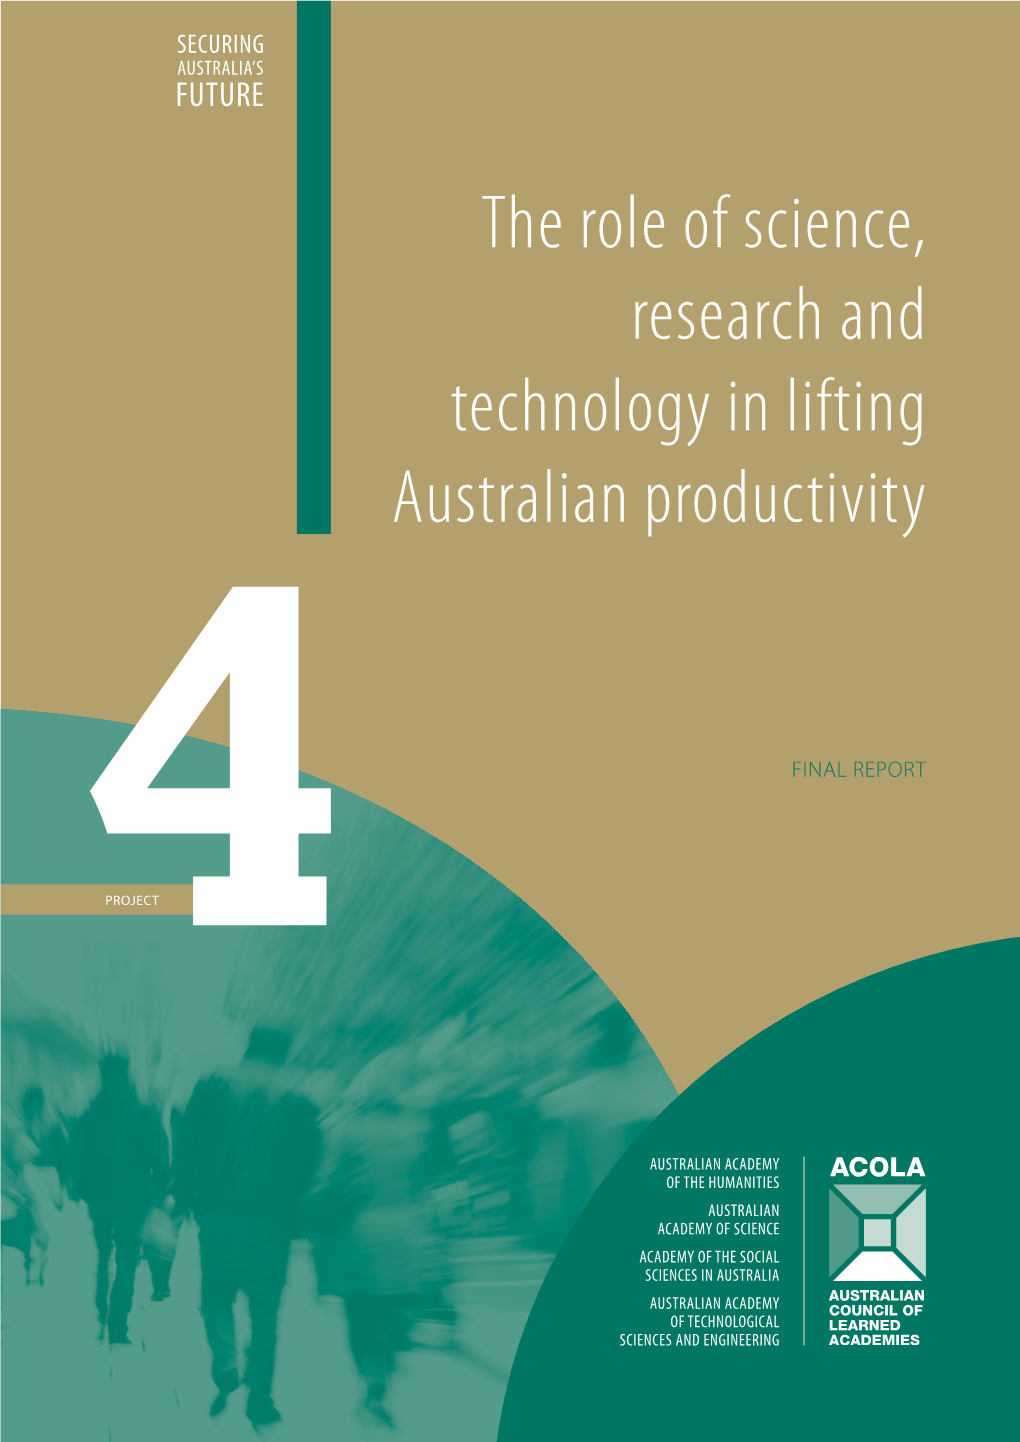 The Role of Science, Research and Technology in Lifting Australian Productivity